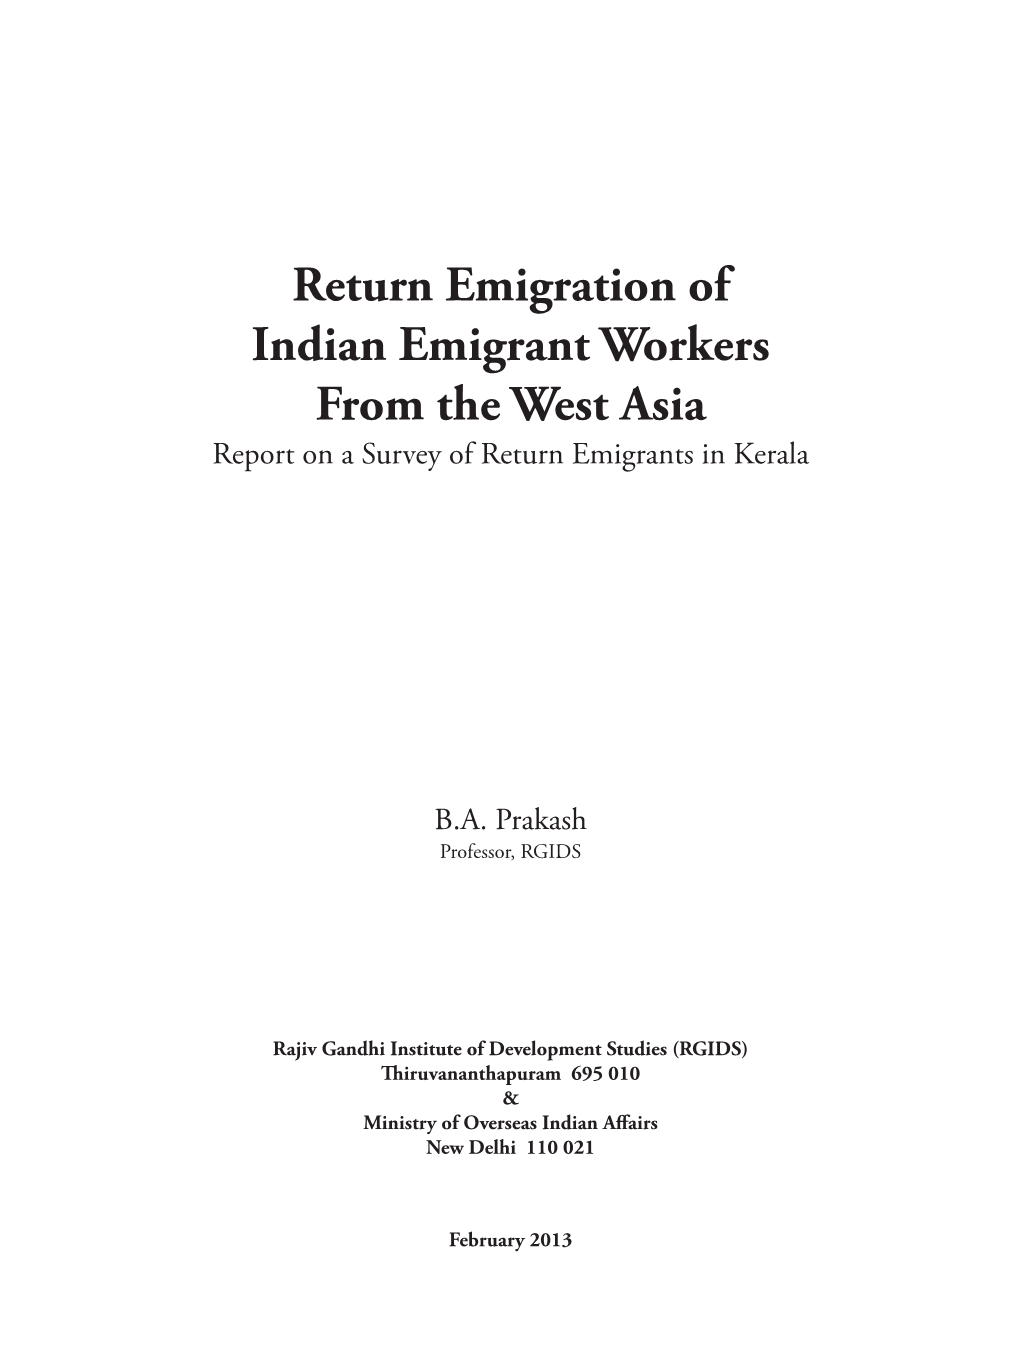 Return Emigration of Indian Emigrant Workers from the West Asia Report on a Survey of Return Emigrants in Kerala